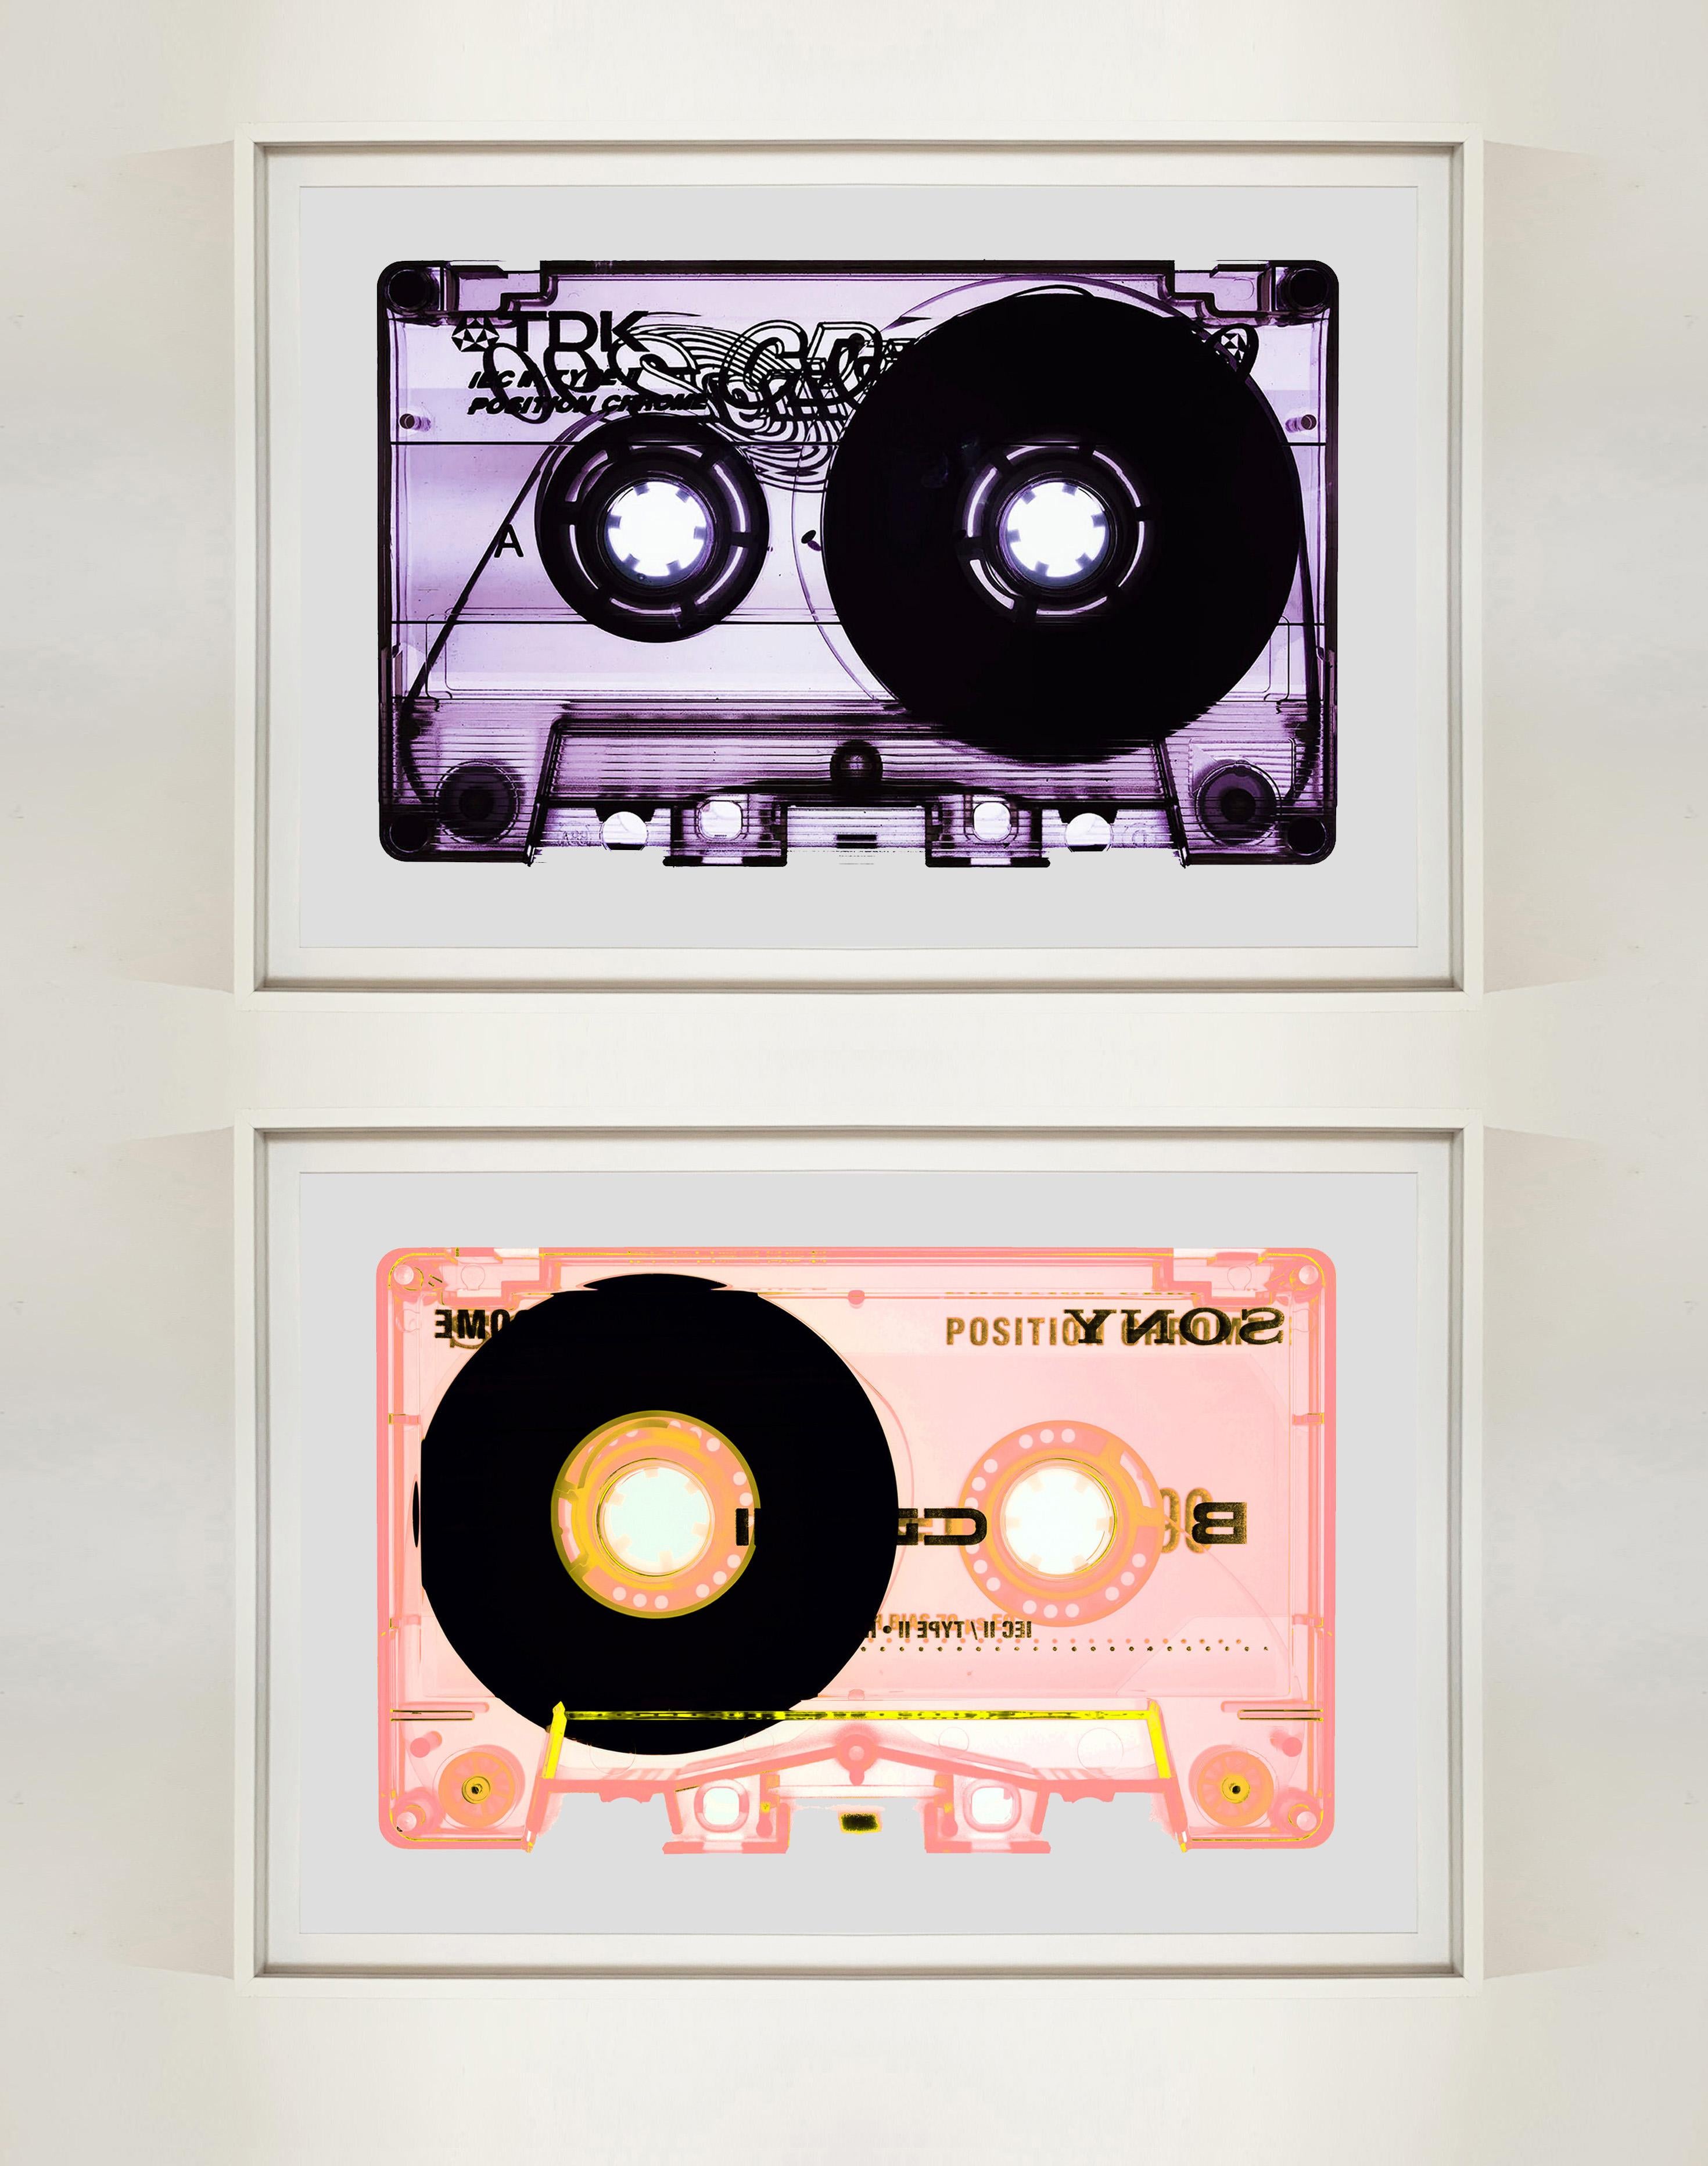 Tape Collection, Type II Tutti Frutti - Contemporary Pop Art Color Photography - Orange Print by Heidler & Heeps